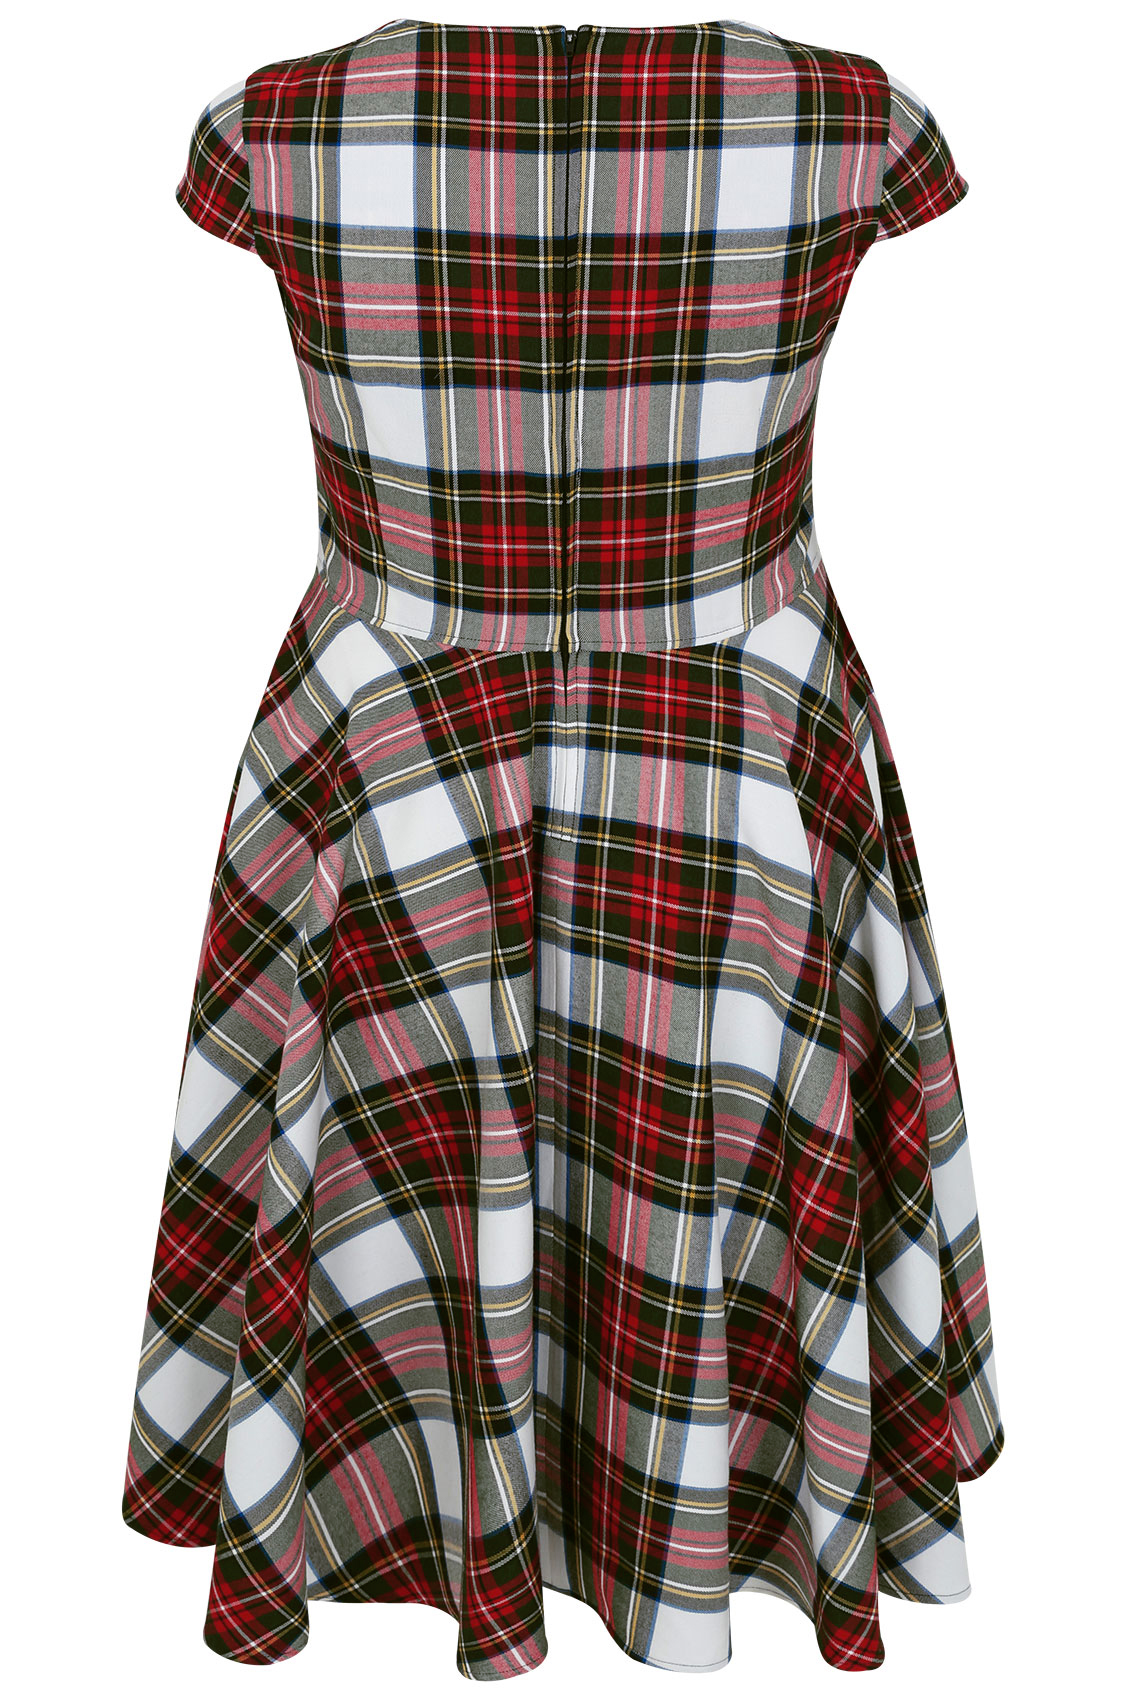 HELL BUNNY Red & Green Tartan Check 50s Midi Dress plus Size 16 to 32